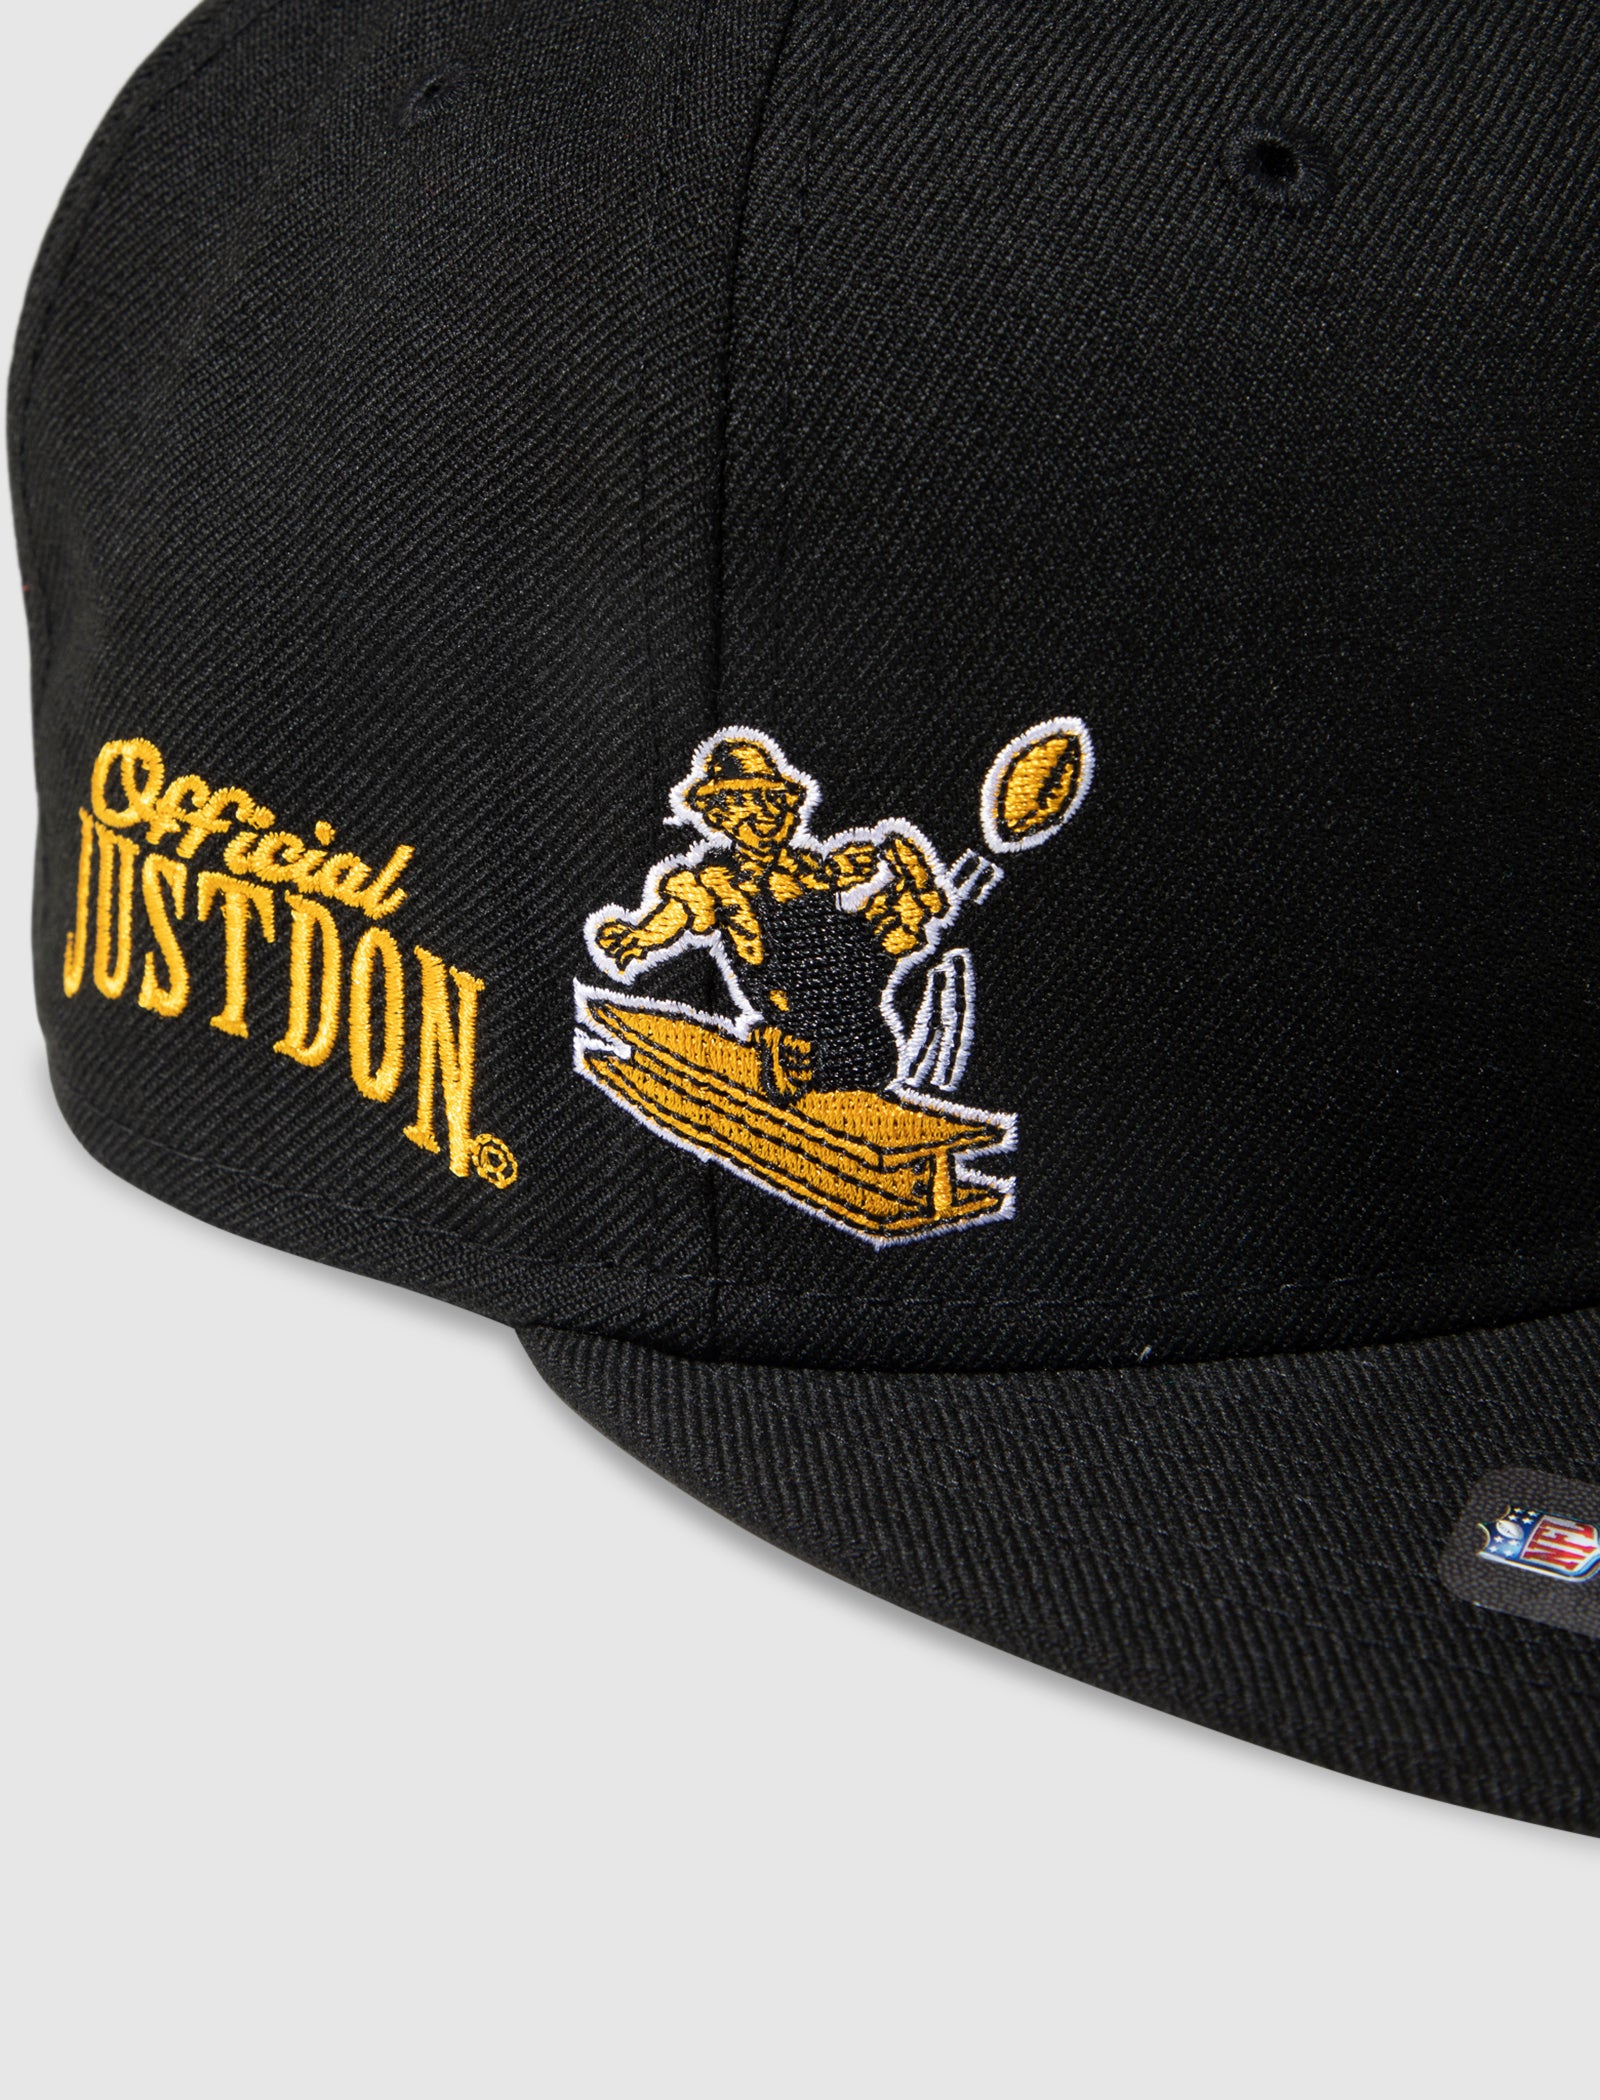 NEW ERA x JUST DON PITTSBURGH STEELERS HAT